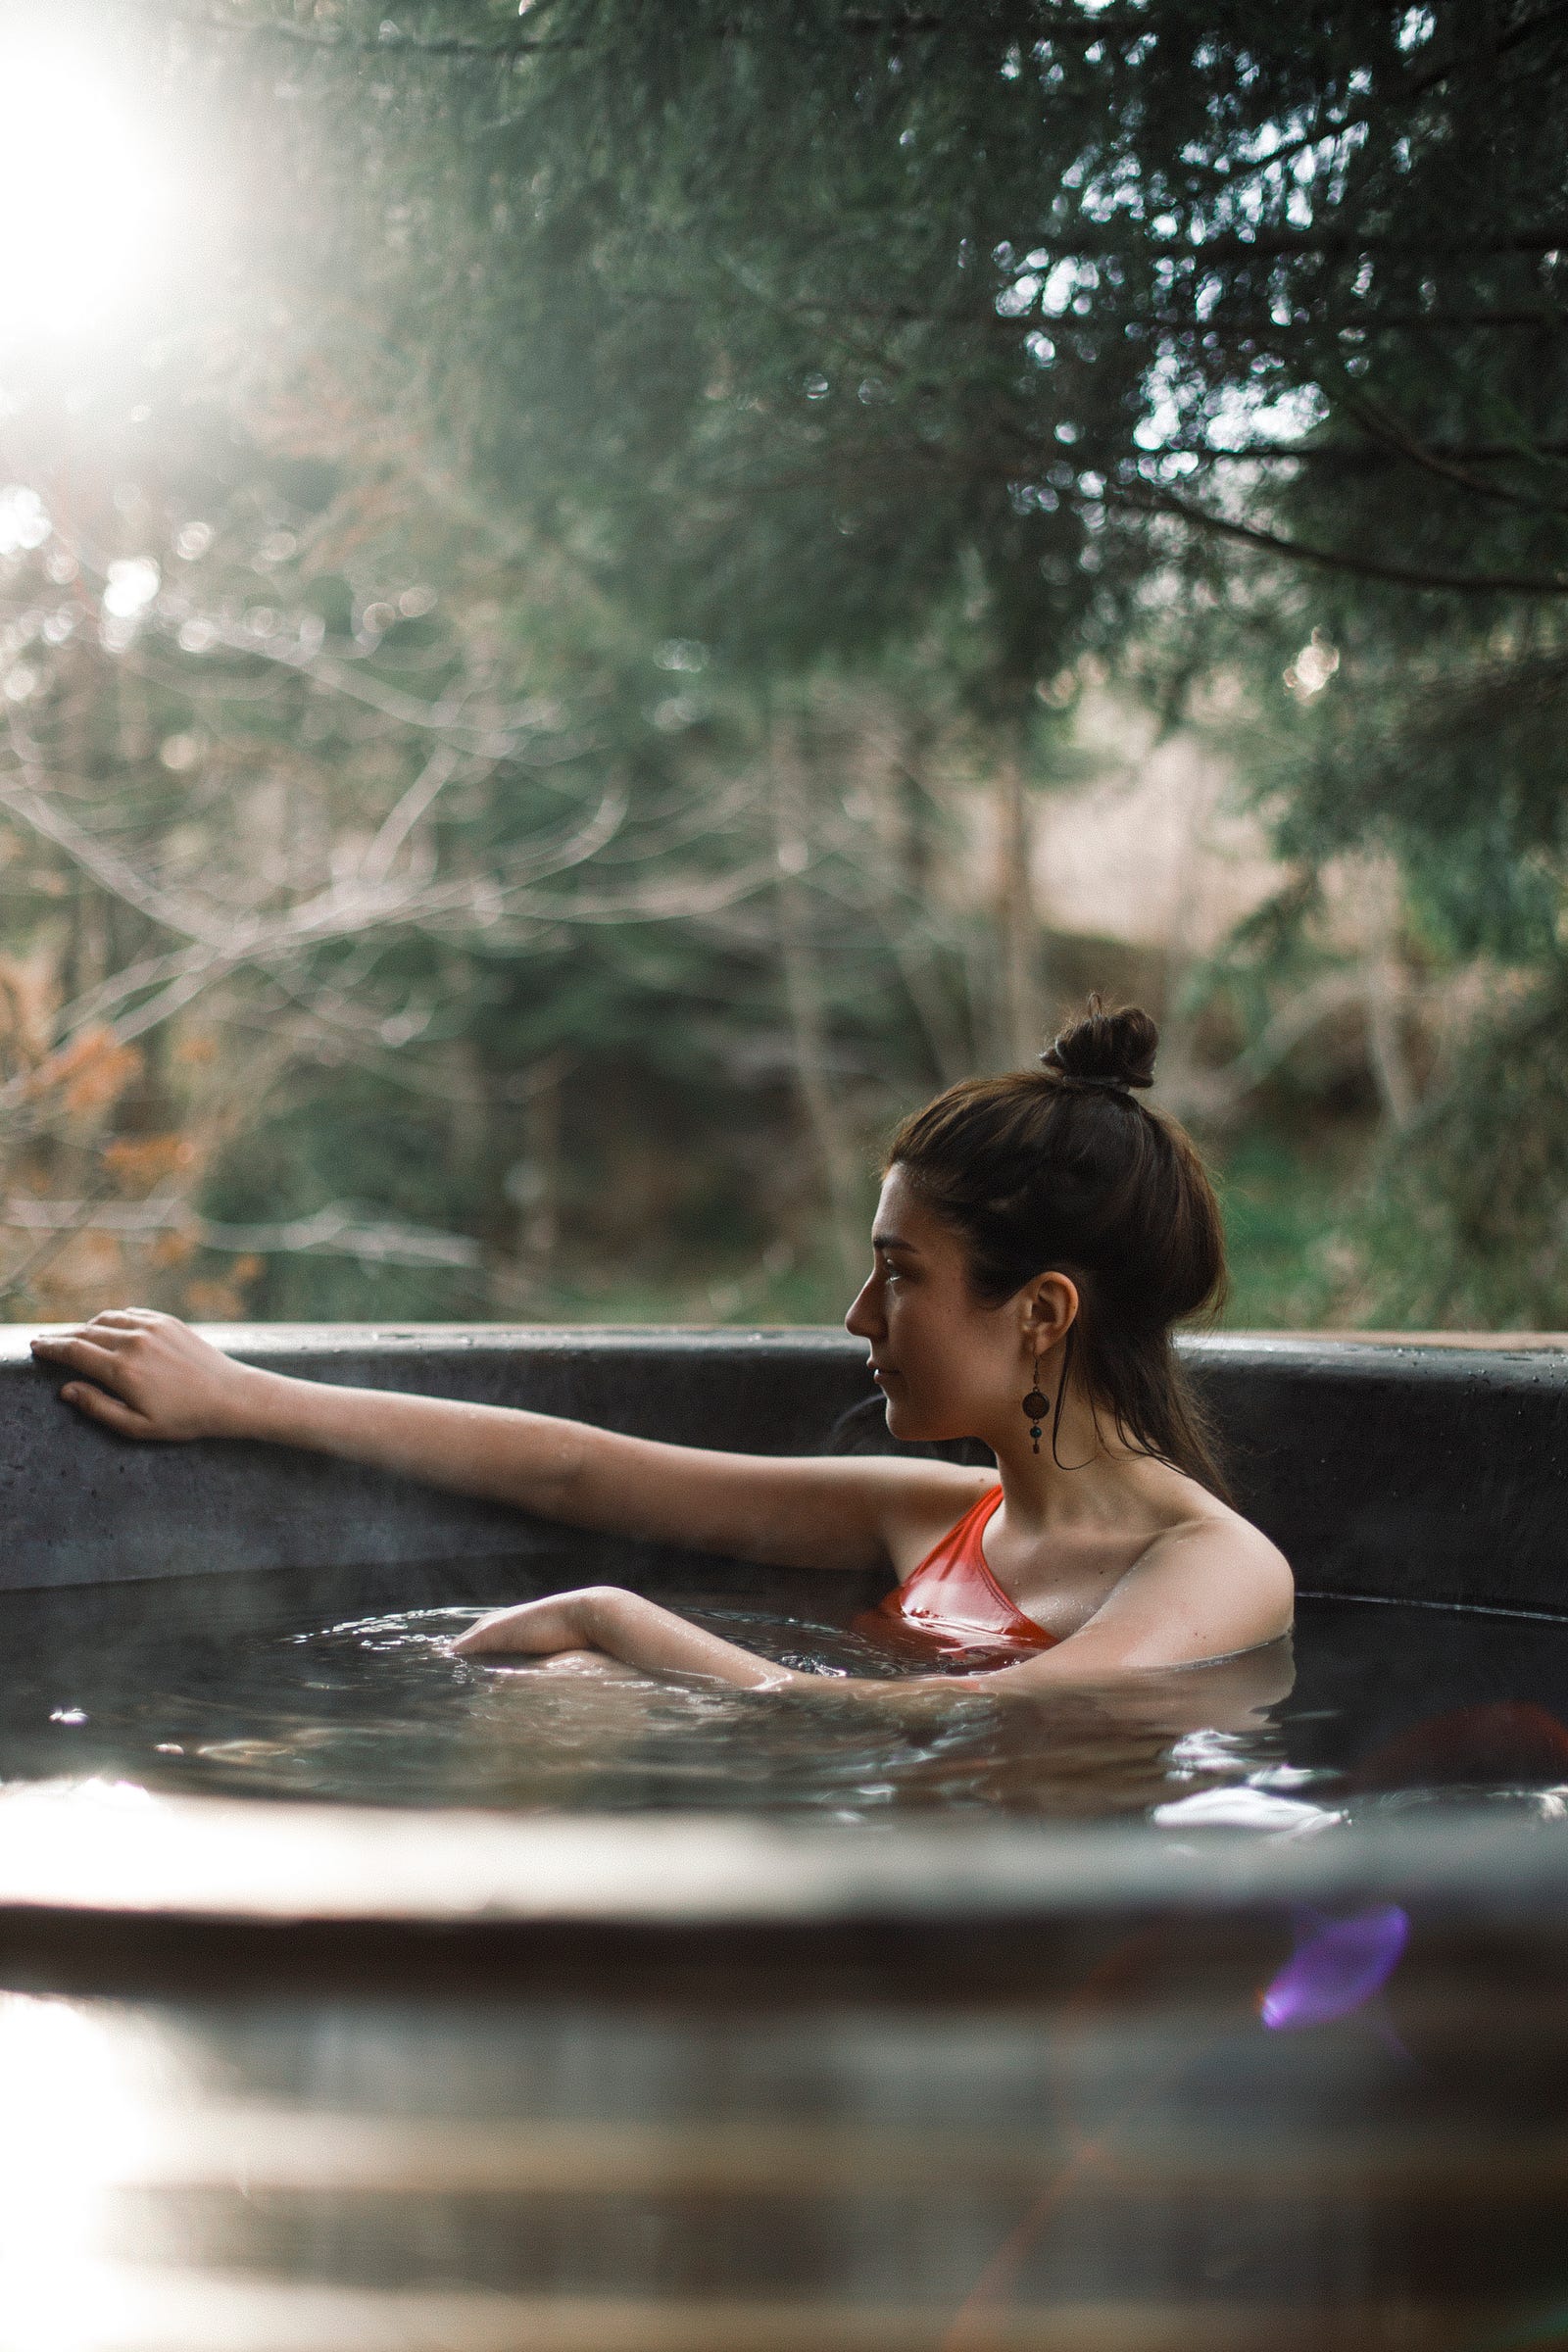 A brunette woman sits in a hot tub, facing to the left. Her right arm is extended to touch the edge of the tub. Hot tubs are notorious for harboring various waterborne pathogens, including bacteria, viruses, and fungi. Insufficient chlorine or bromine levels and improper pH balance can promote the growth of these microorganisms, posing a significant health risk to hot tub users.